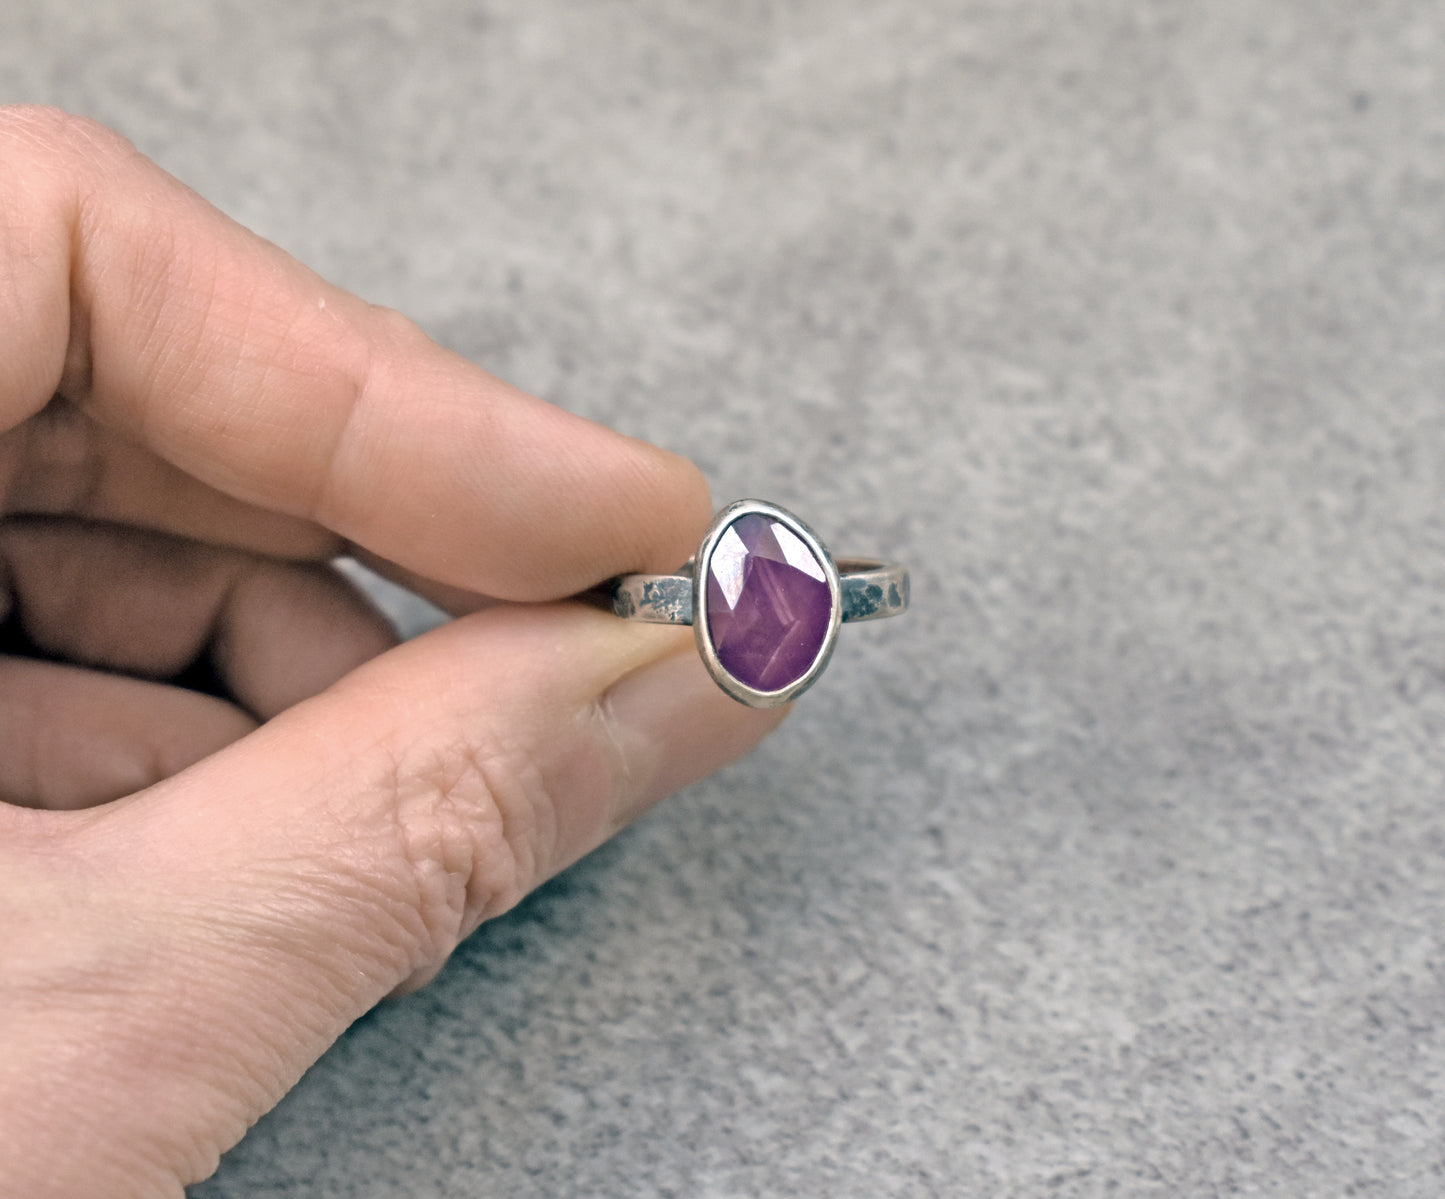 Faceted Pink Sapphire and Sterling Silver Ring, Size 7, Natural Gemstone Silversmith Jewelry